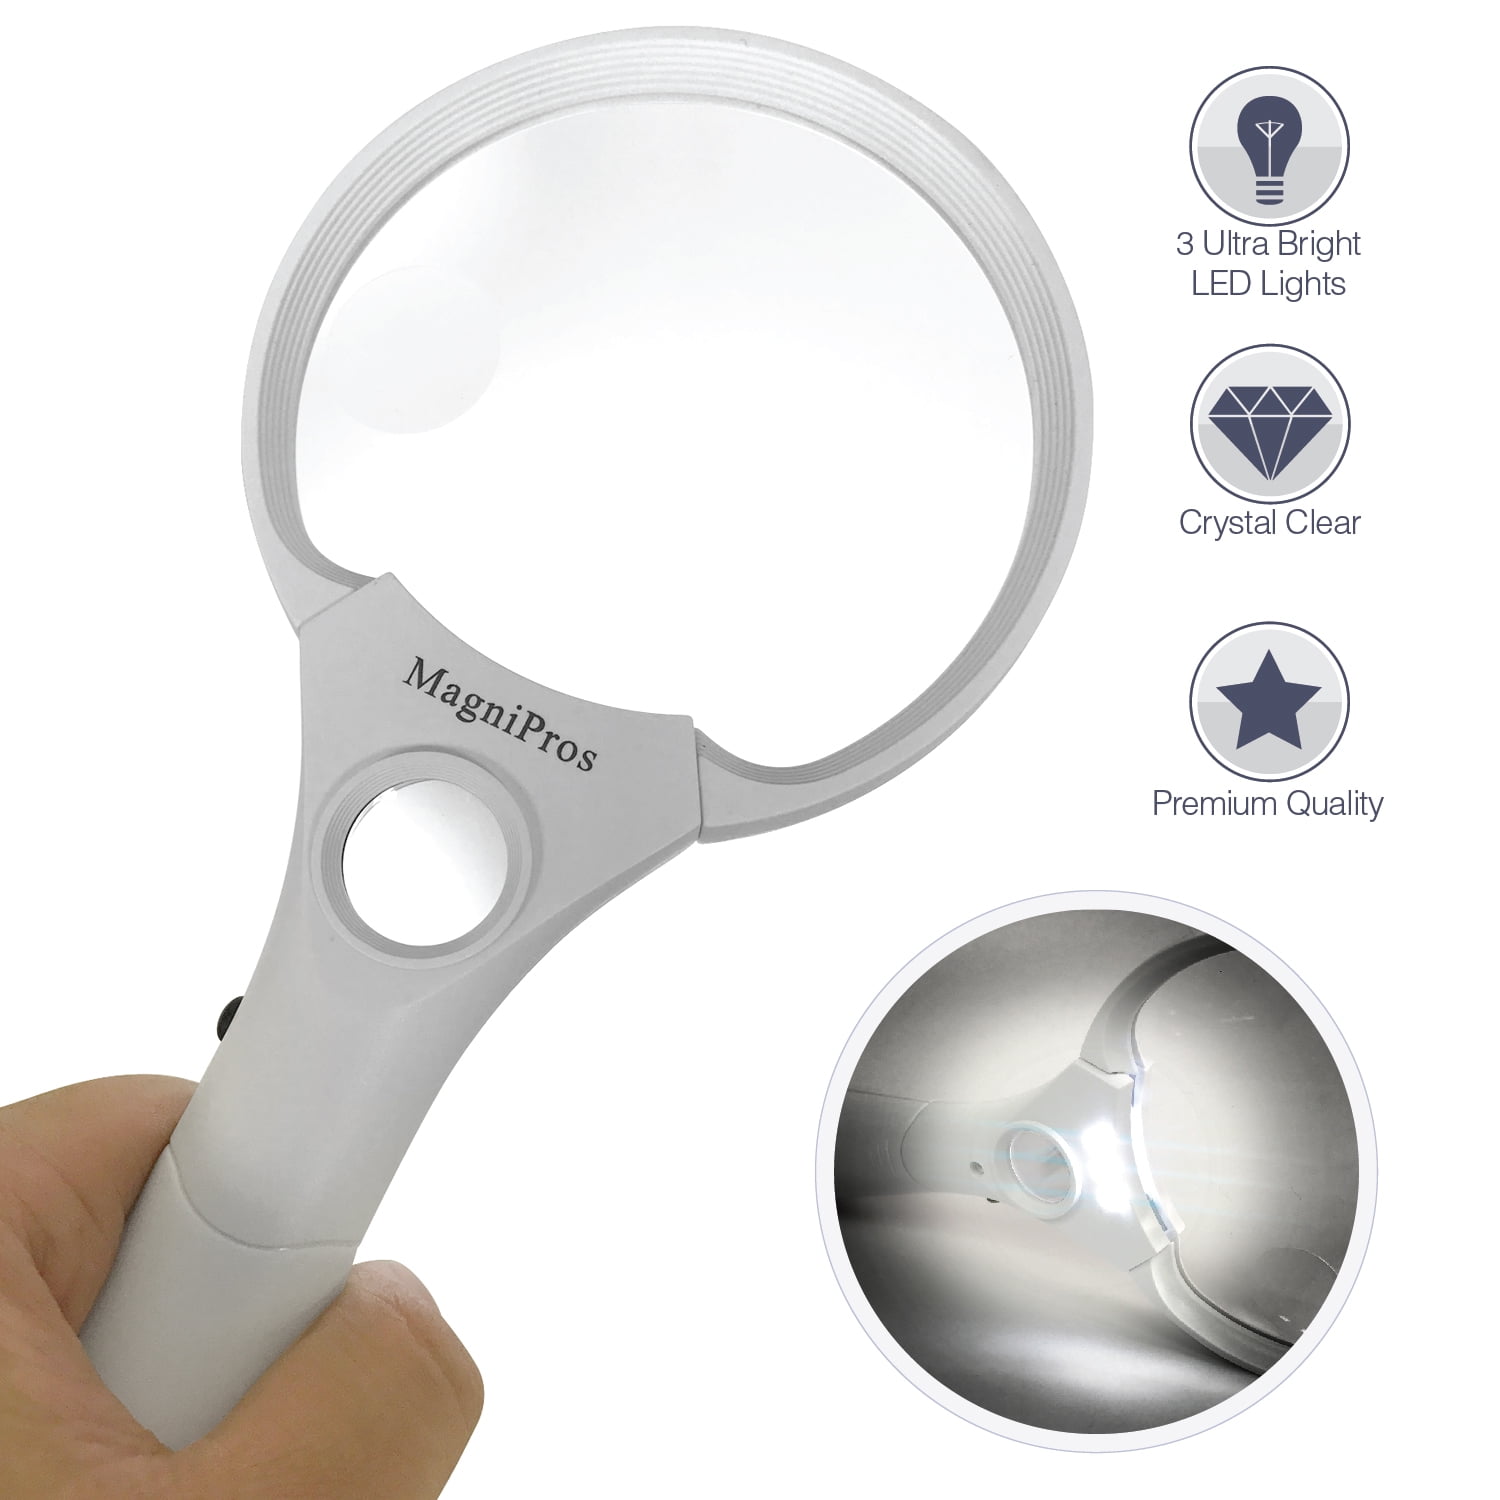 AC Infinity Jewelers Loupe - Pocket Magnifying Glass - Indoor Farmer